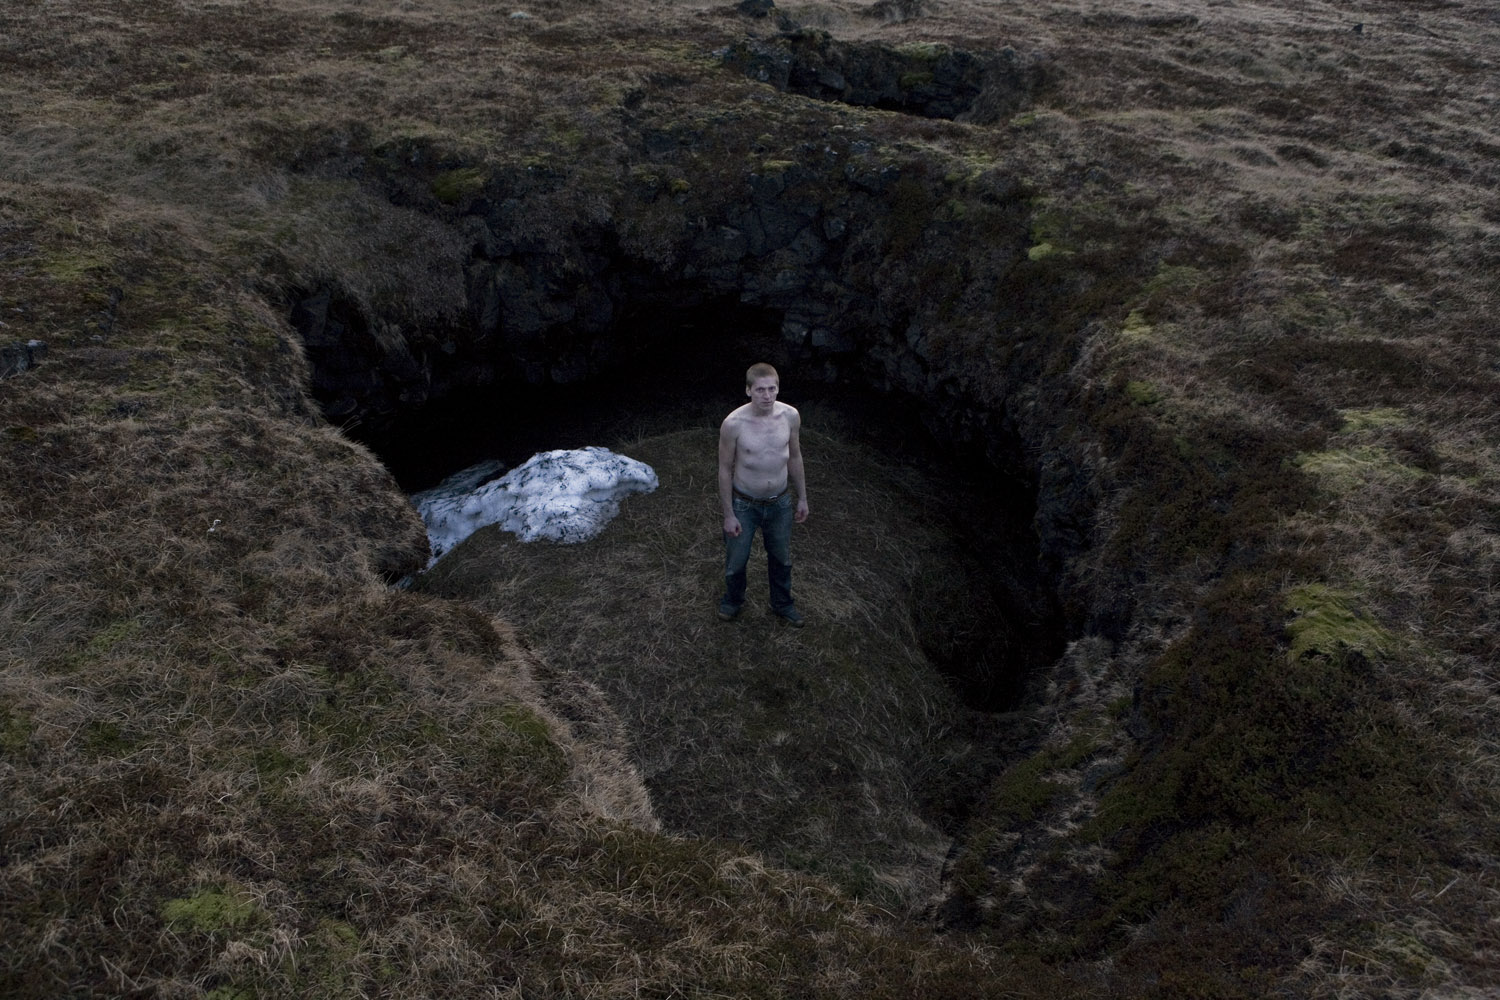 Man standing in one of many mysterious ‘holes’ in the ground in the Snaefellsnes peninsula (home to the volcano that Jules Verne based his novel Journey to the Center of the Earth on). These holes are often several meters in diameter and in depth, creating sunken impressions on the landscape. Iceland, 2011.